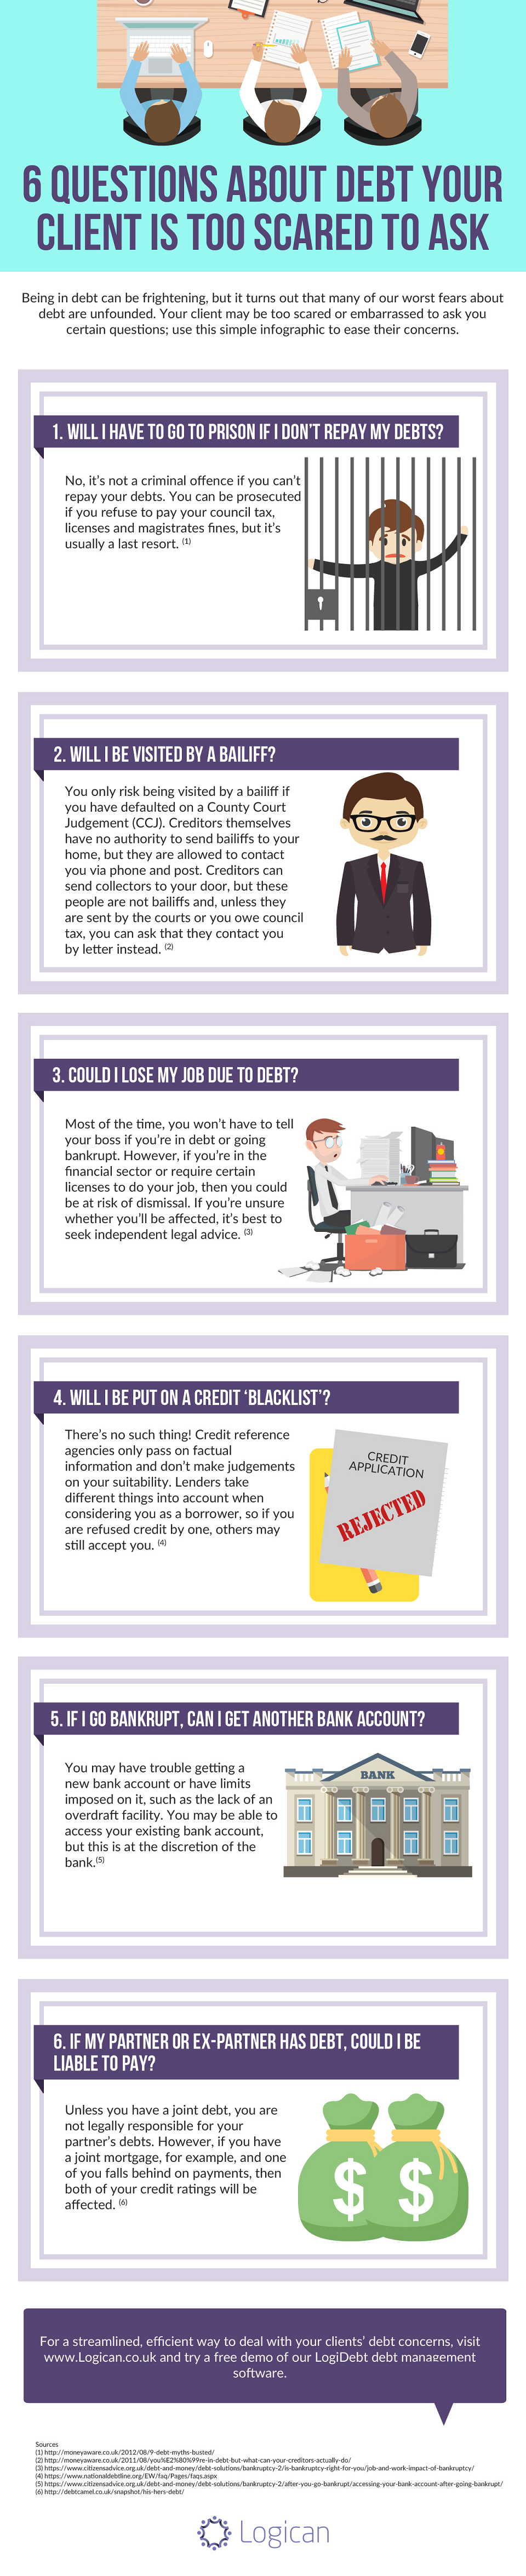 Questions about debt infographic